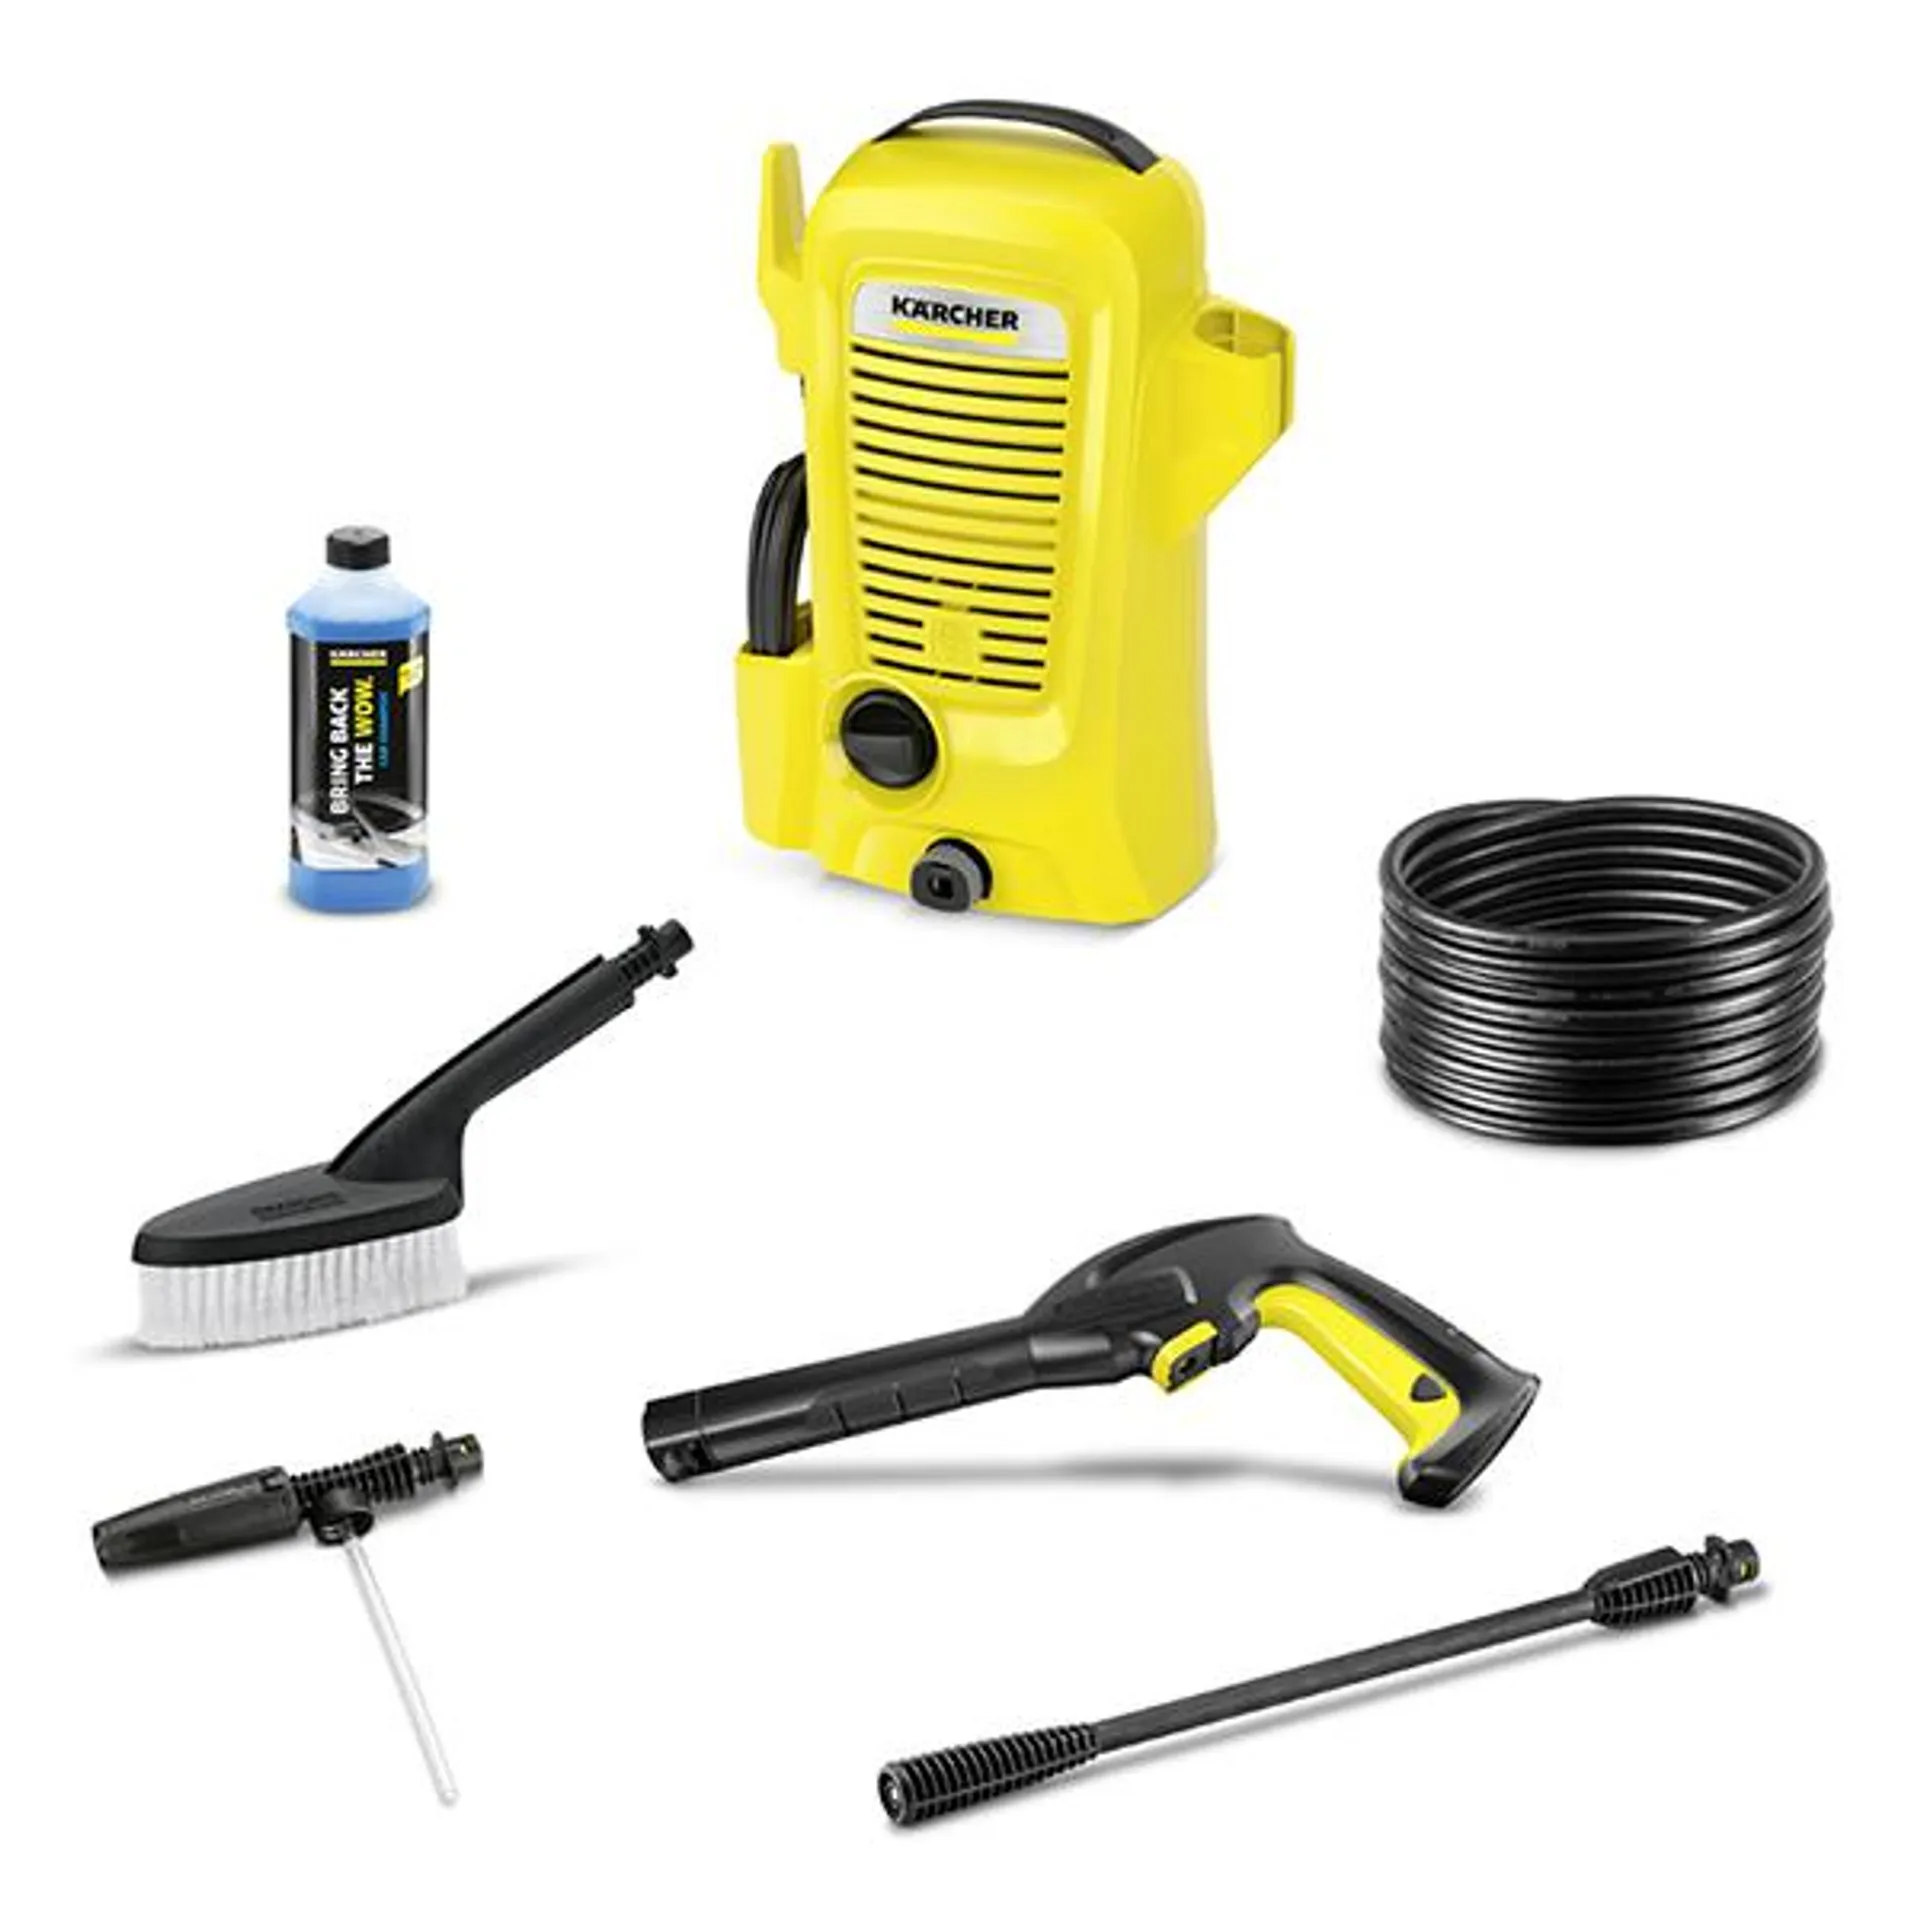 Karcher K2 Universal Car 1400W Pressure Washer with Car Cleaning Kit